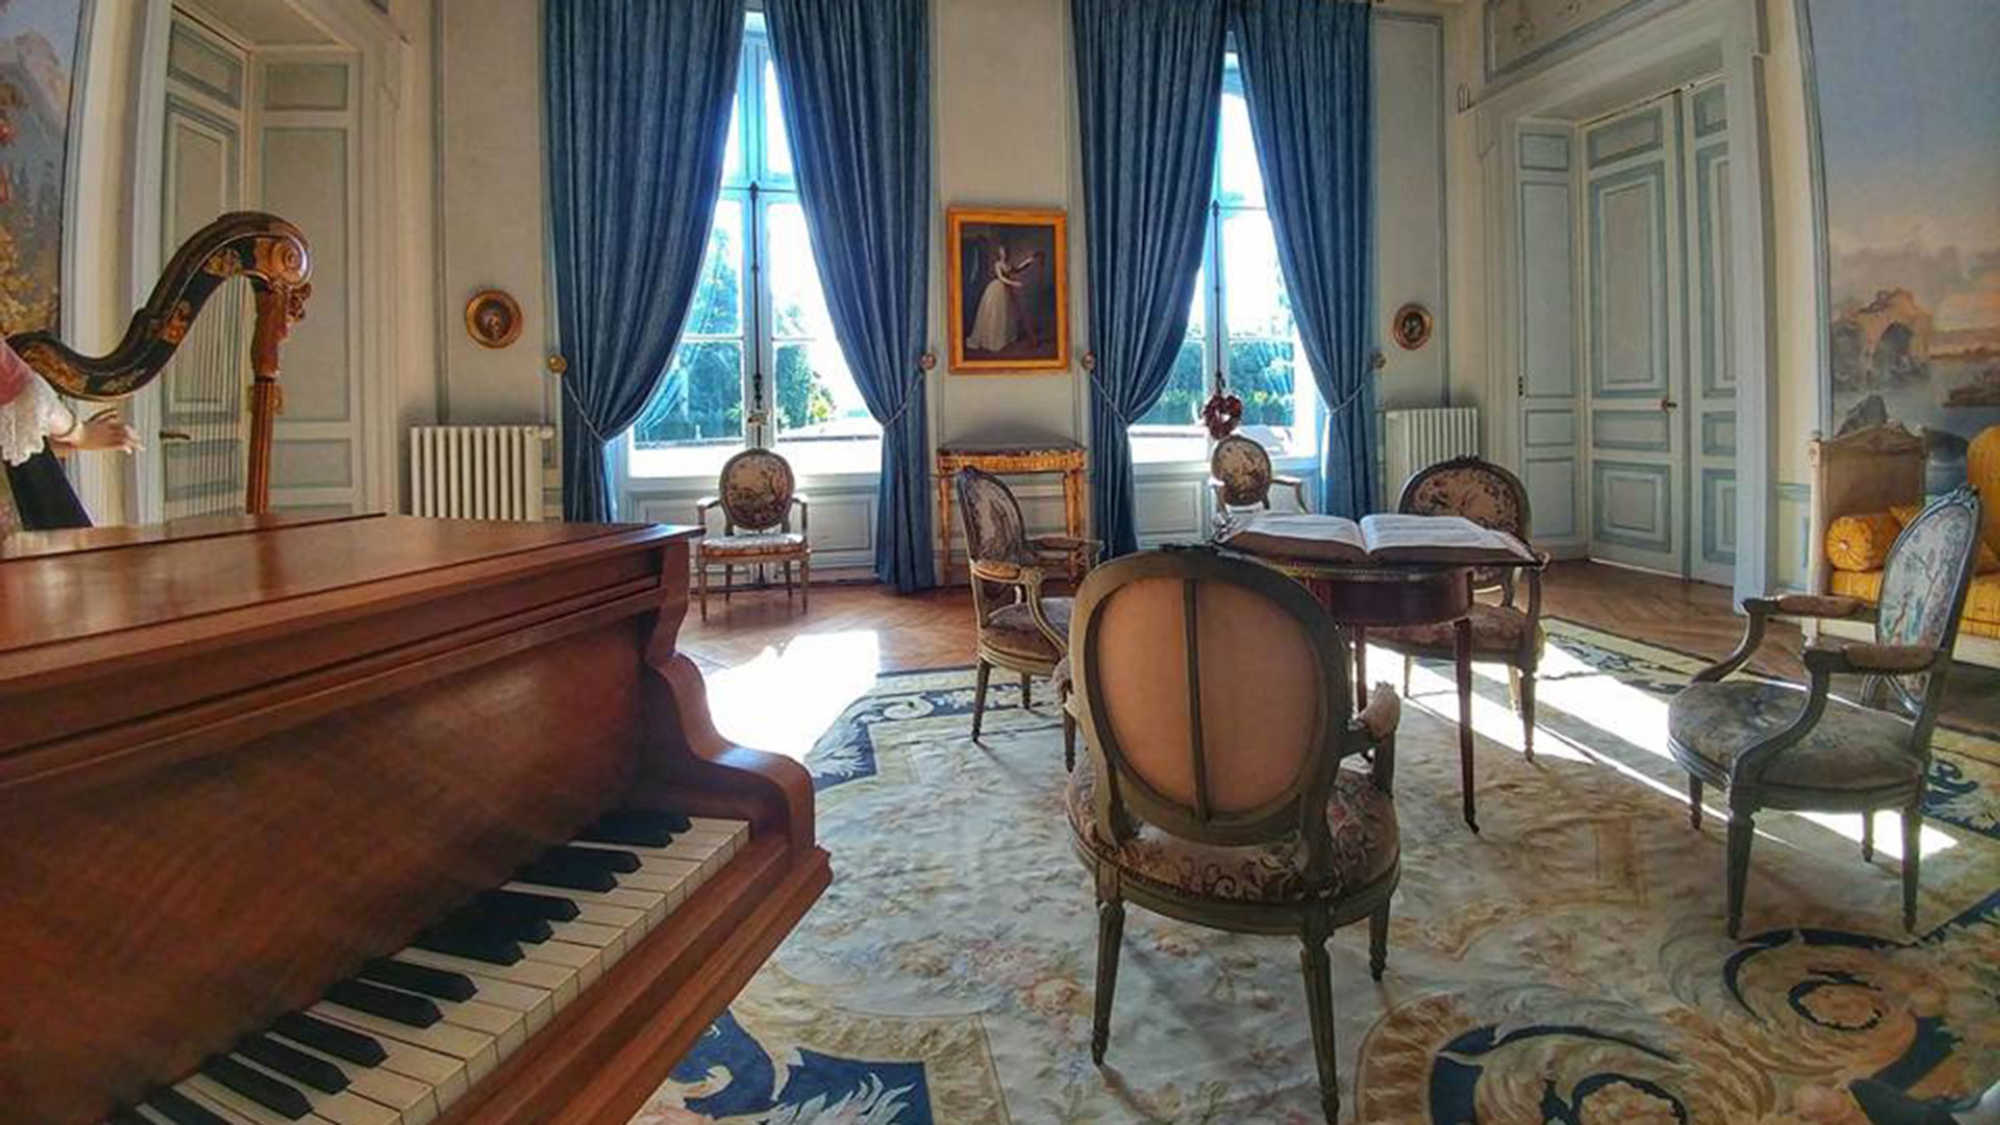 A music room in Chateau des Moyeux in France.